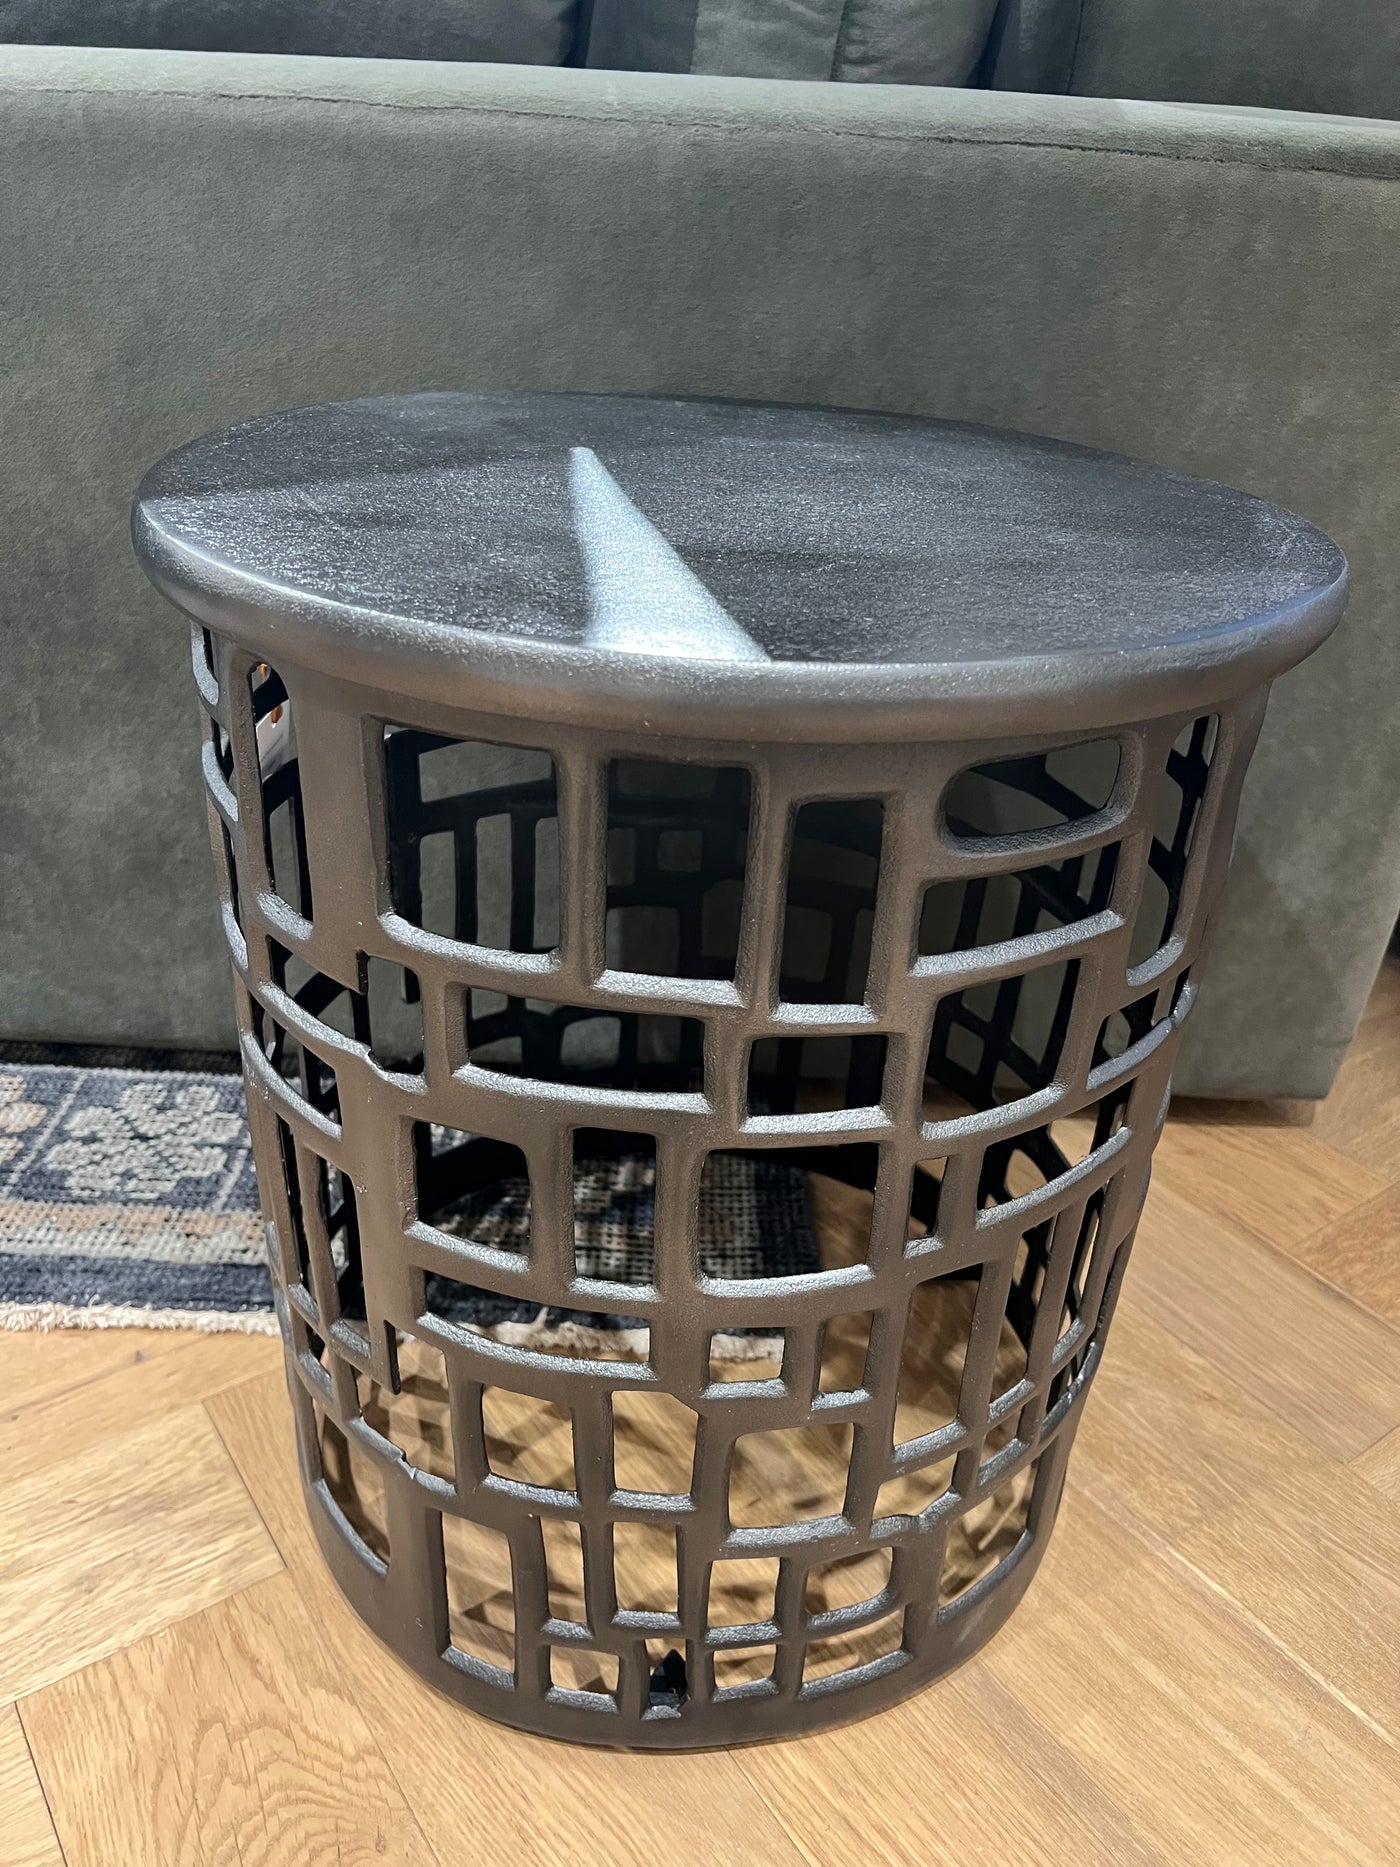 ACCENT TABLE BLACK